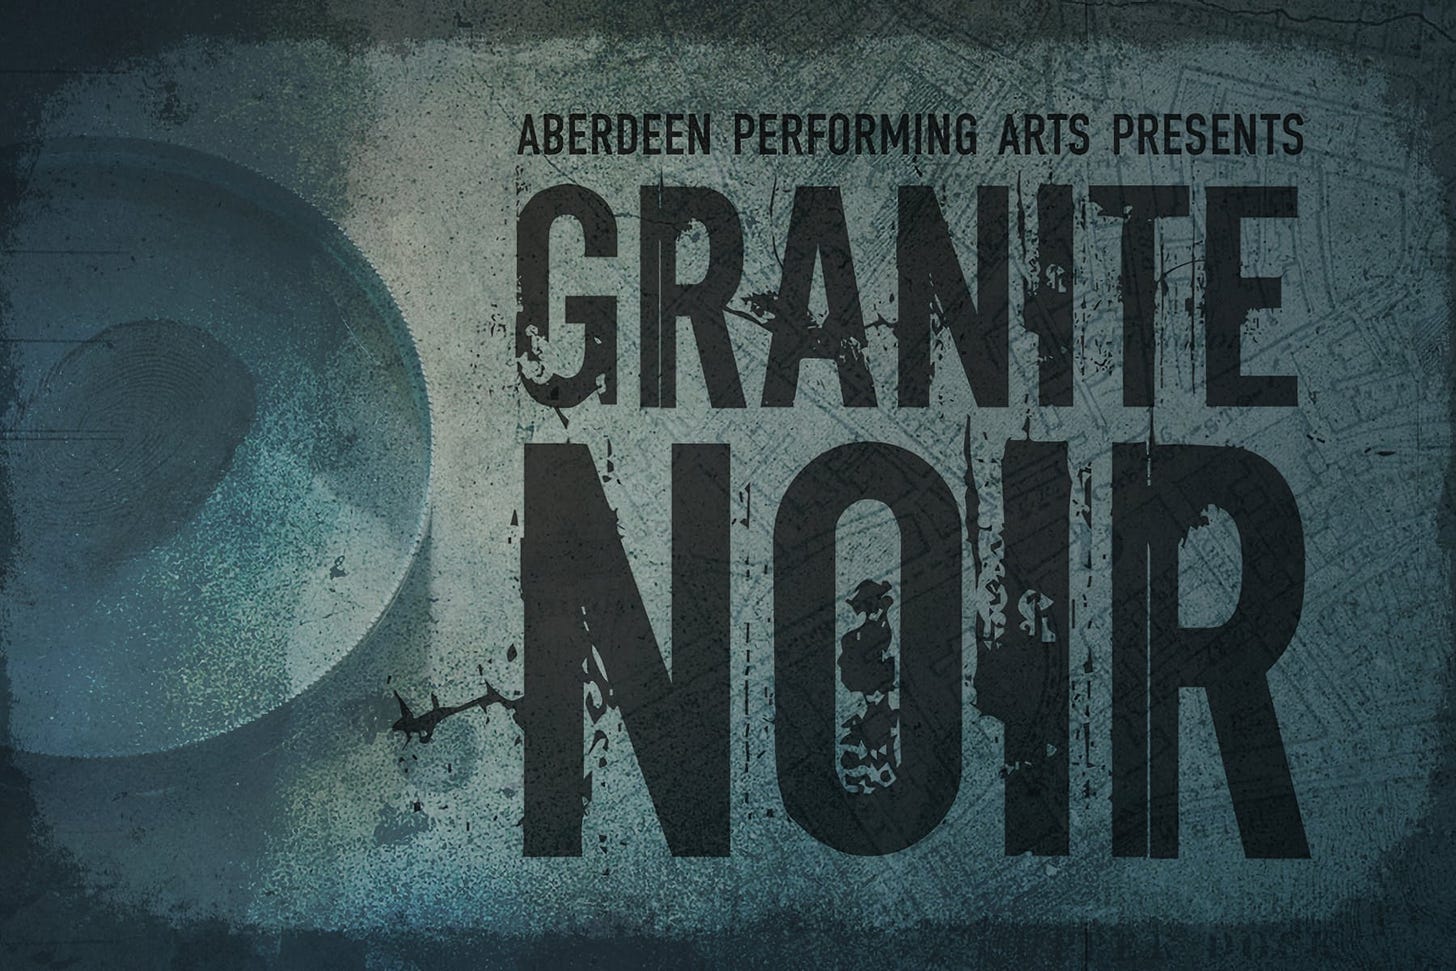 The image features a textured, dark background with the text "Aberdeen Performing Arts presents GRANITE NOIR" prominently displayed in large, bold letters that give a gritty, noir aesthetic. There is a map in the background and on the left is a round saw with a fingerprint…possibly in blood. The overall mood is gritty and mysterious, inviting intrigue and curiosity.